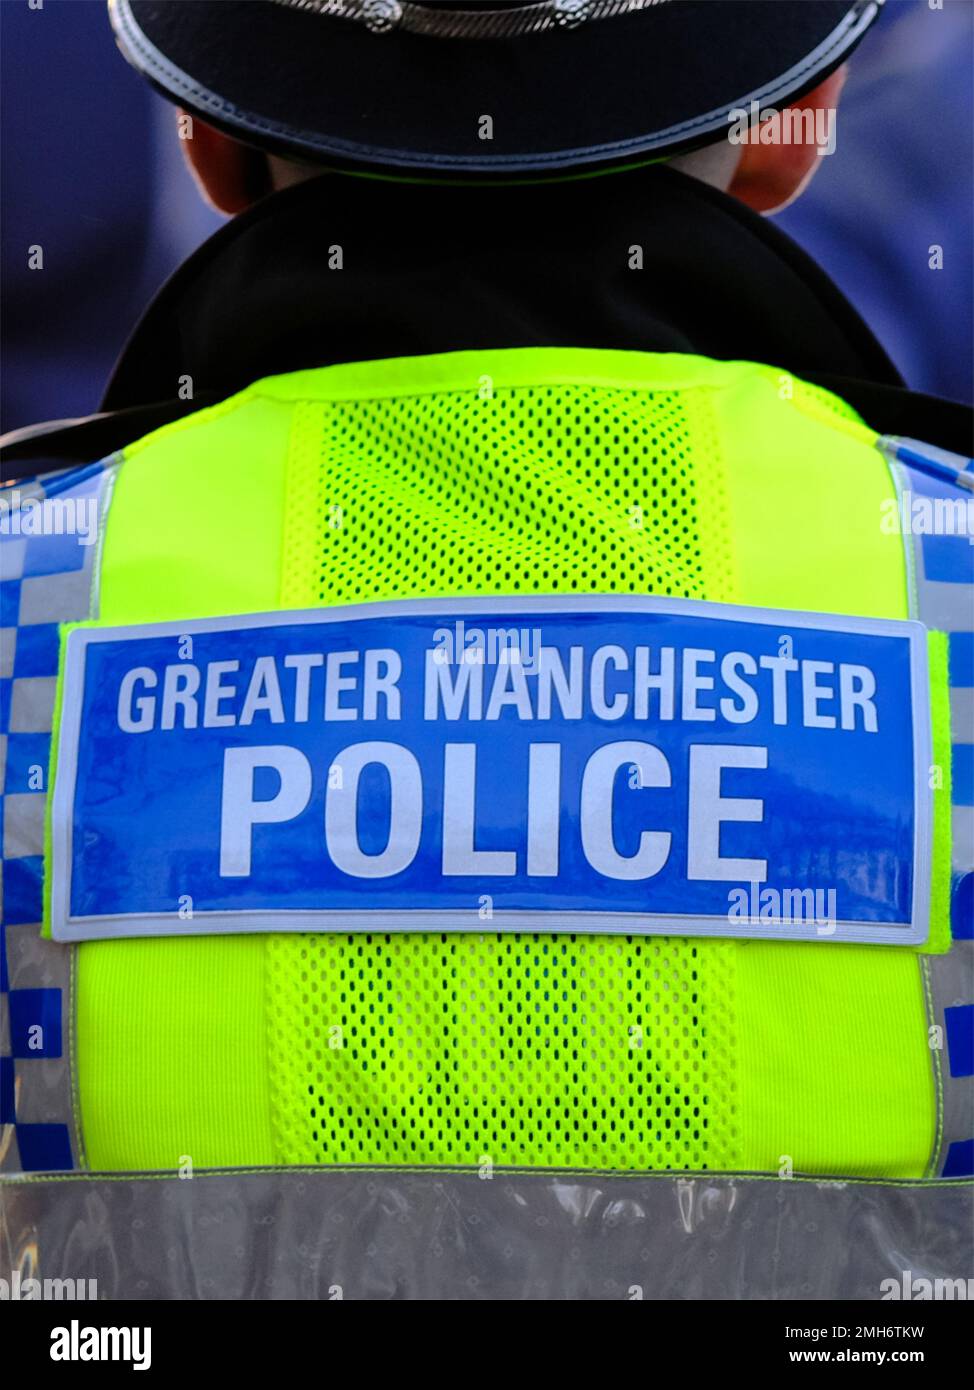 Police officer from behind showing high viz vest with the words Greater Manchester Police on a blue badge Stock Photo